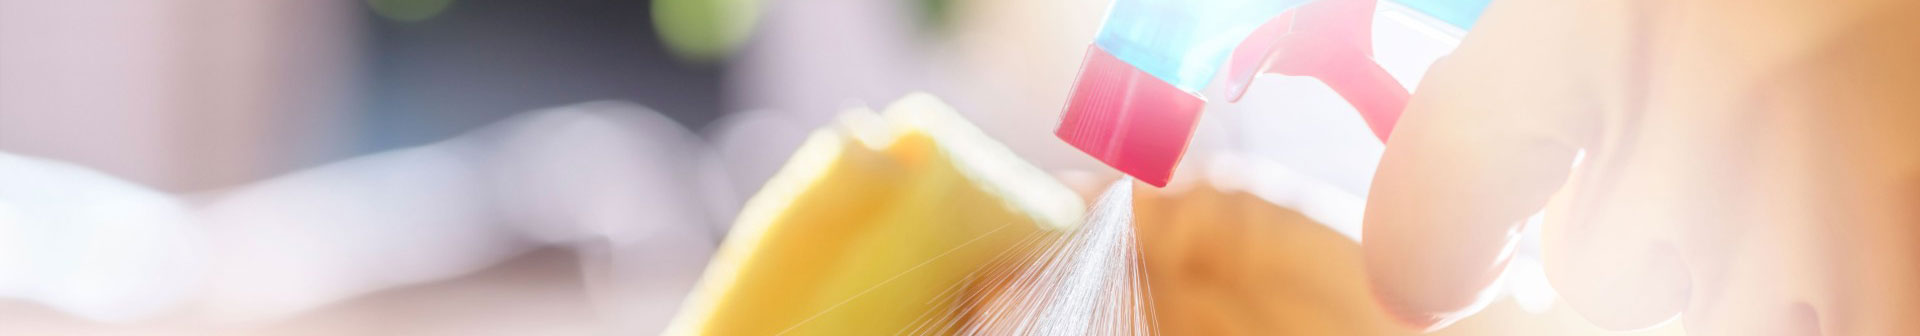 cleaning products spray bottle and sponge